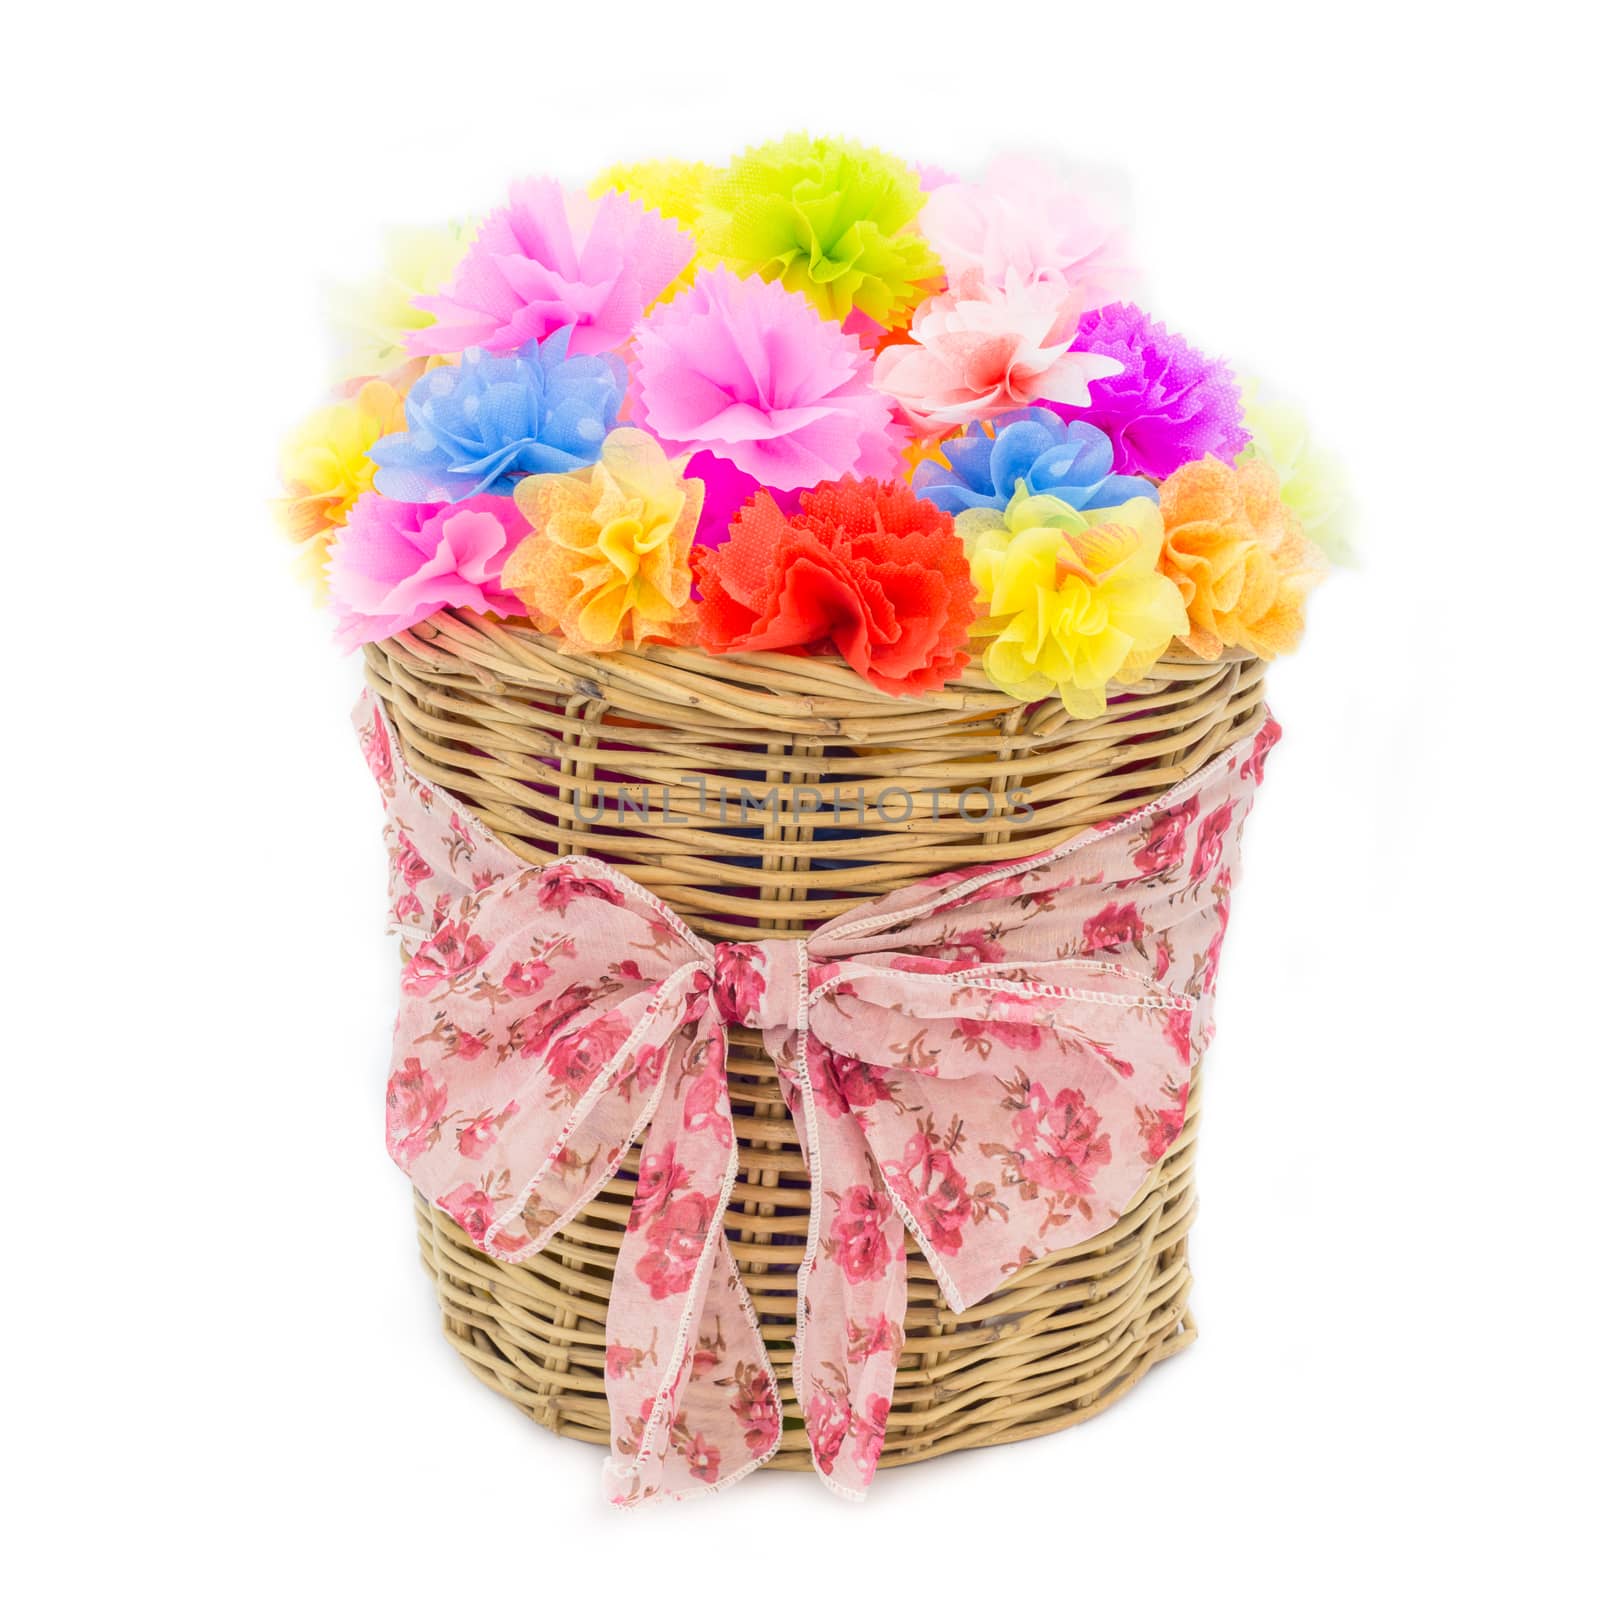 Bright flowers in basket isolated on white by powerbeephoto